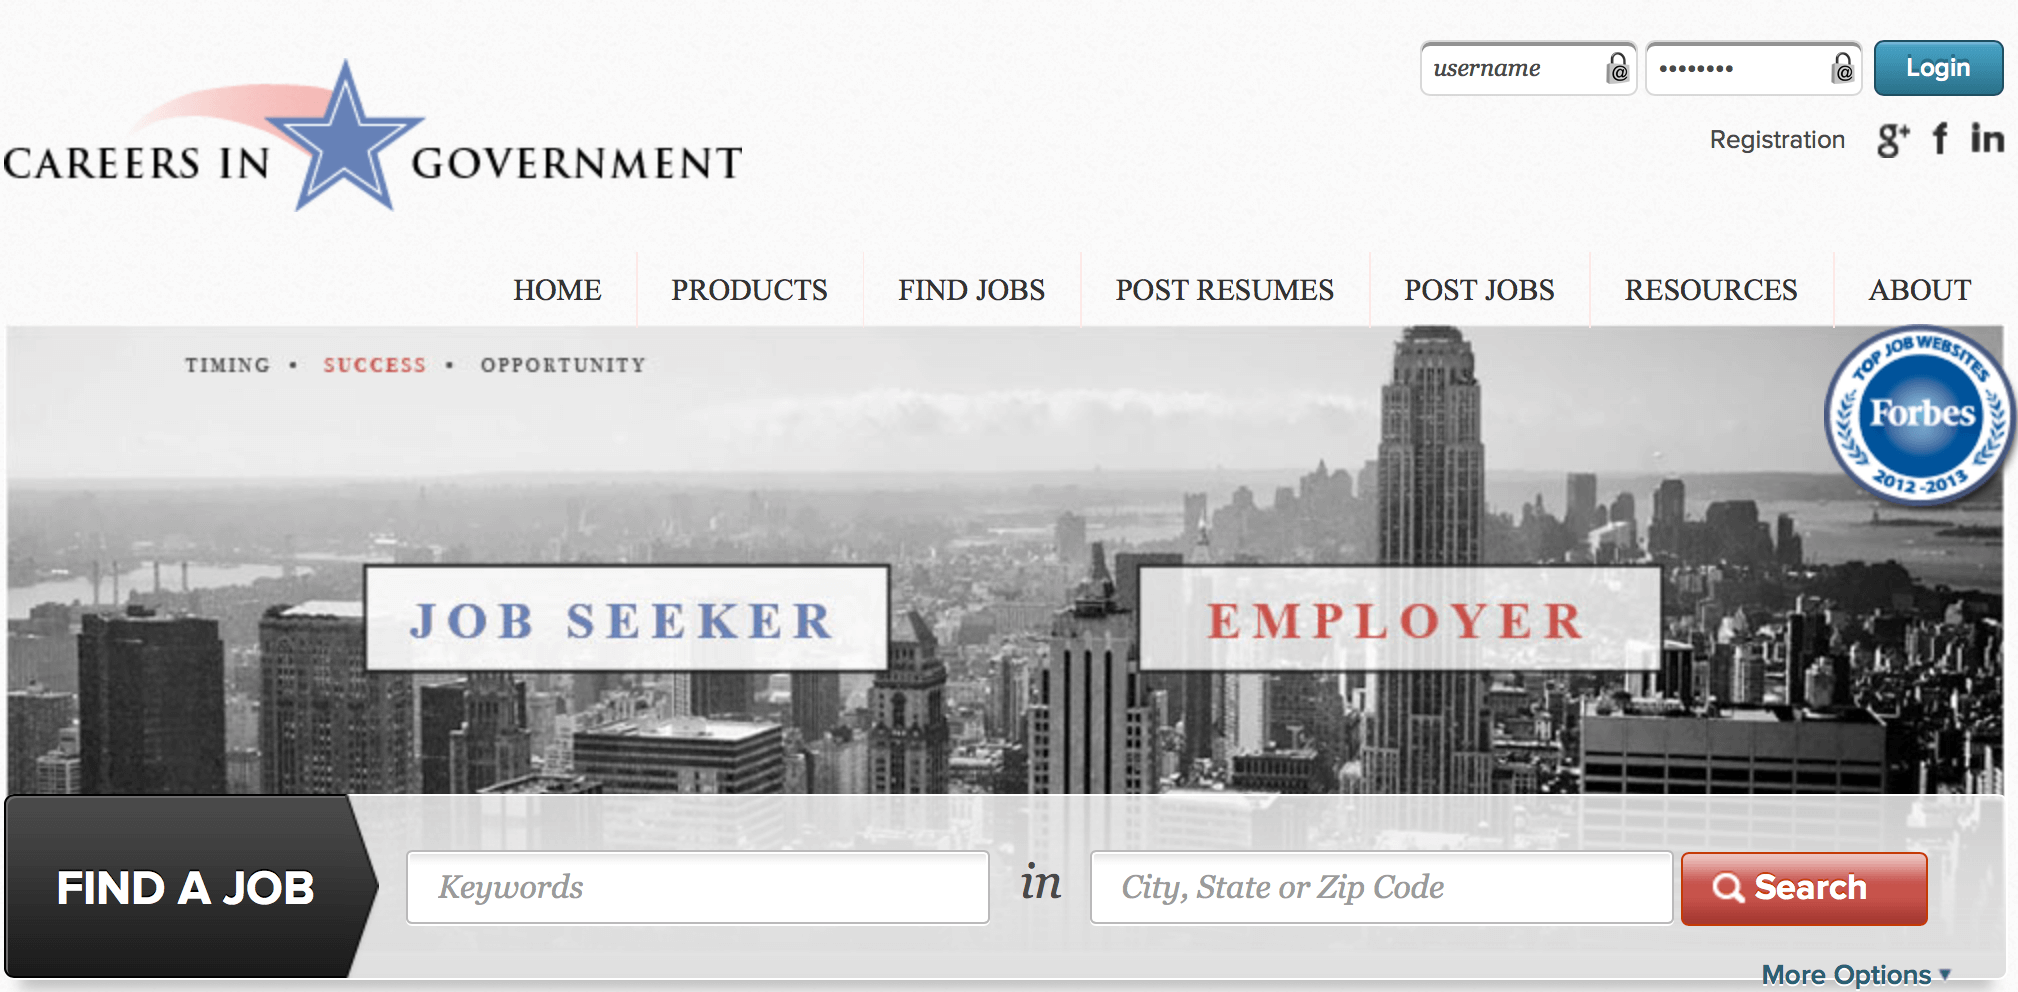 Customized Employer Profile Pages Generate Traffic and Brand Awareness